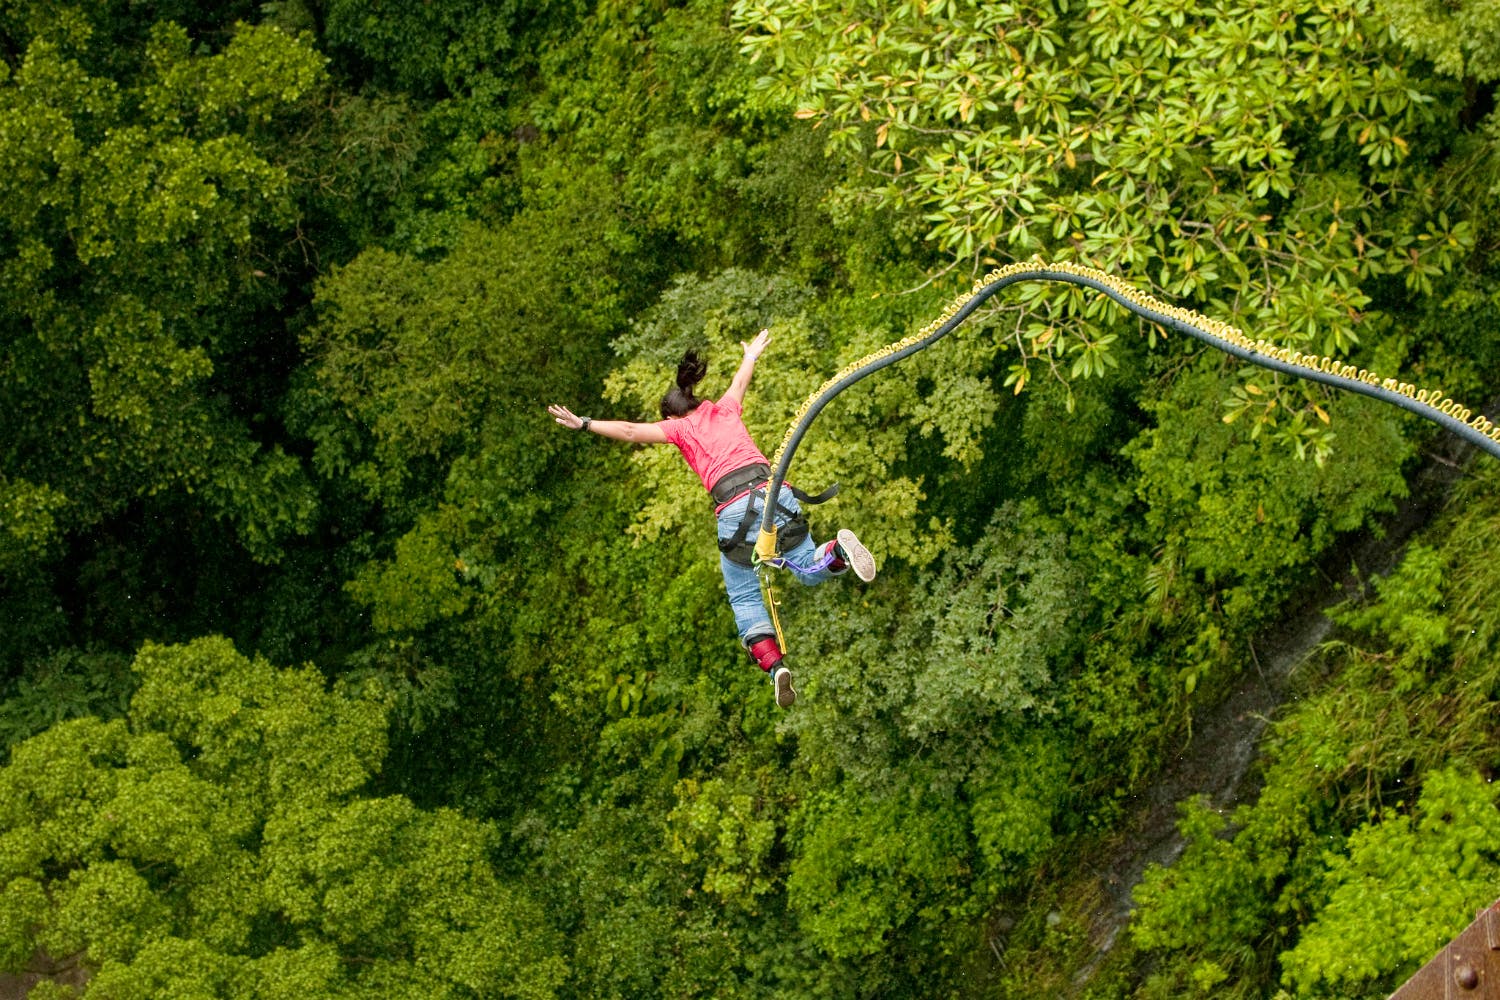 Jumping,Bungee jumping,Adventure,Extreme sport,Bungee cord,Jungle,Recreation,Flip (acrobatic),Tree,Exercise